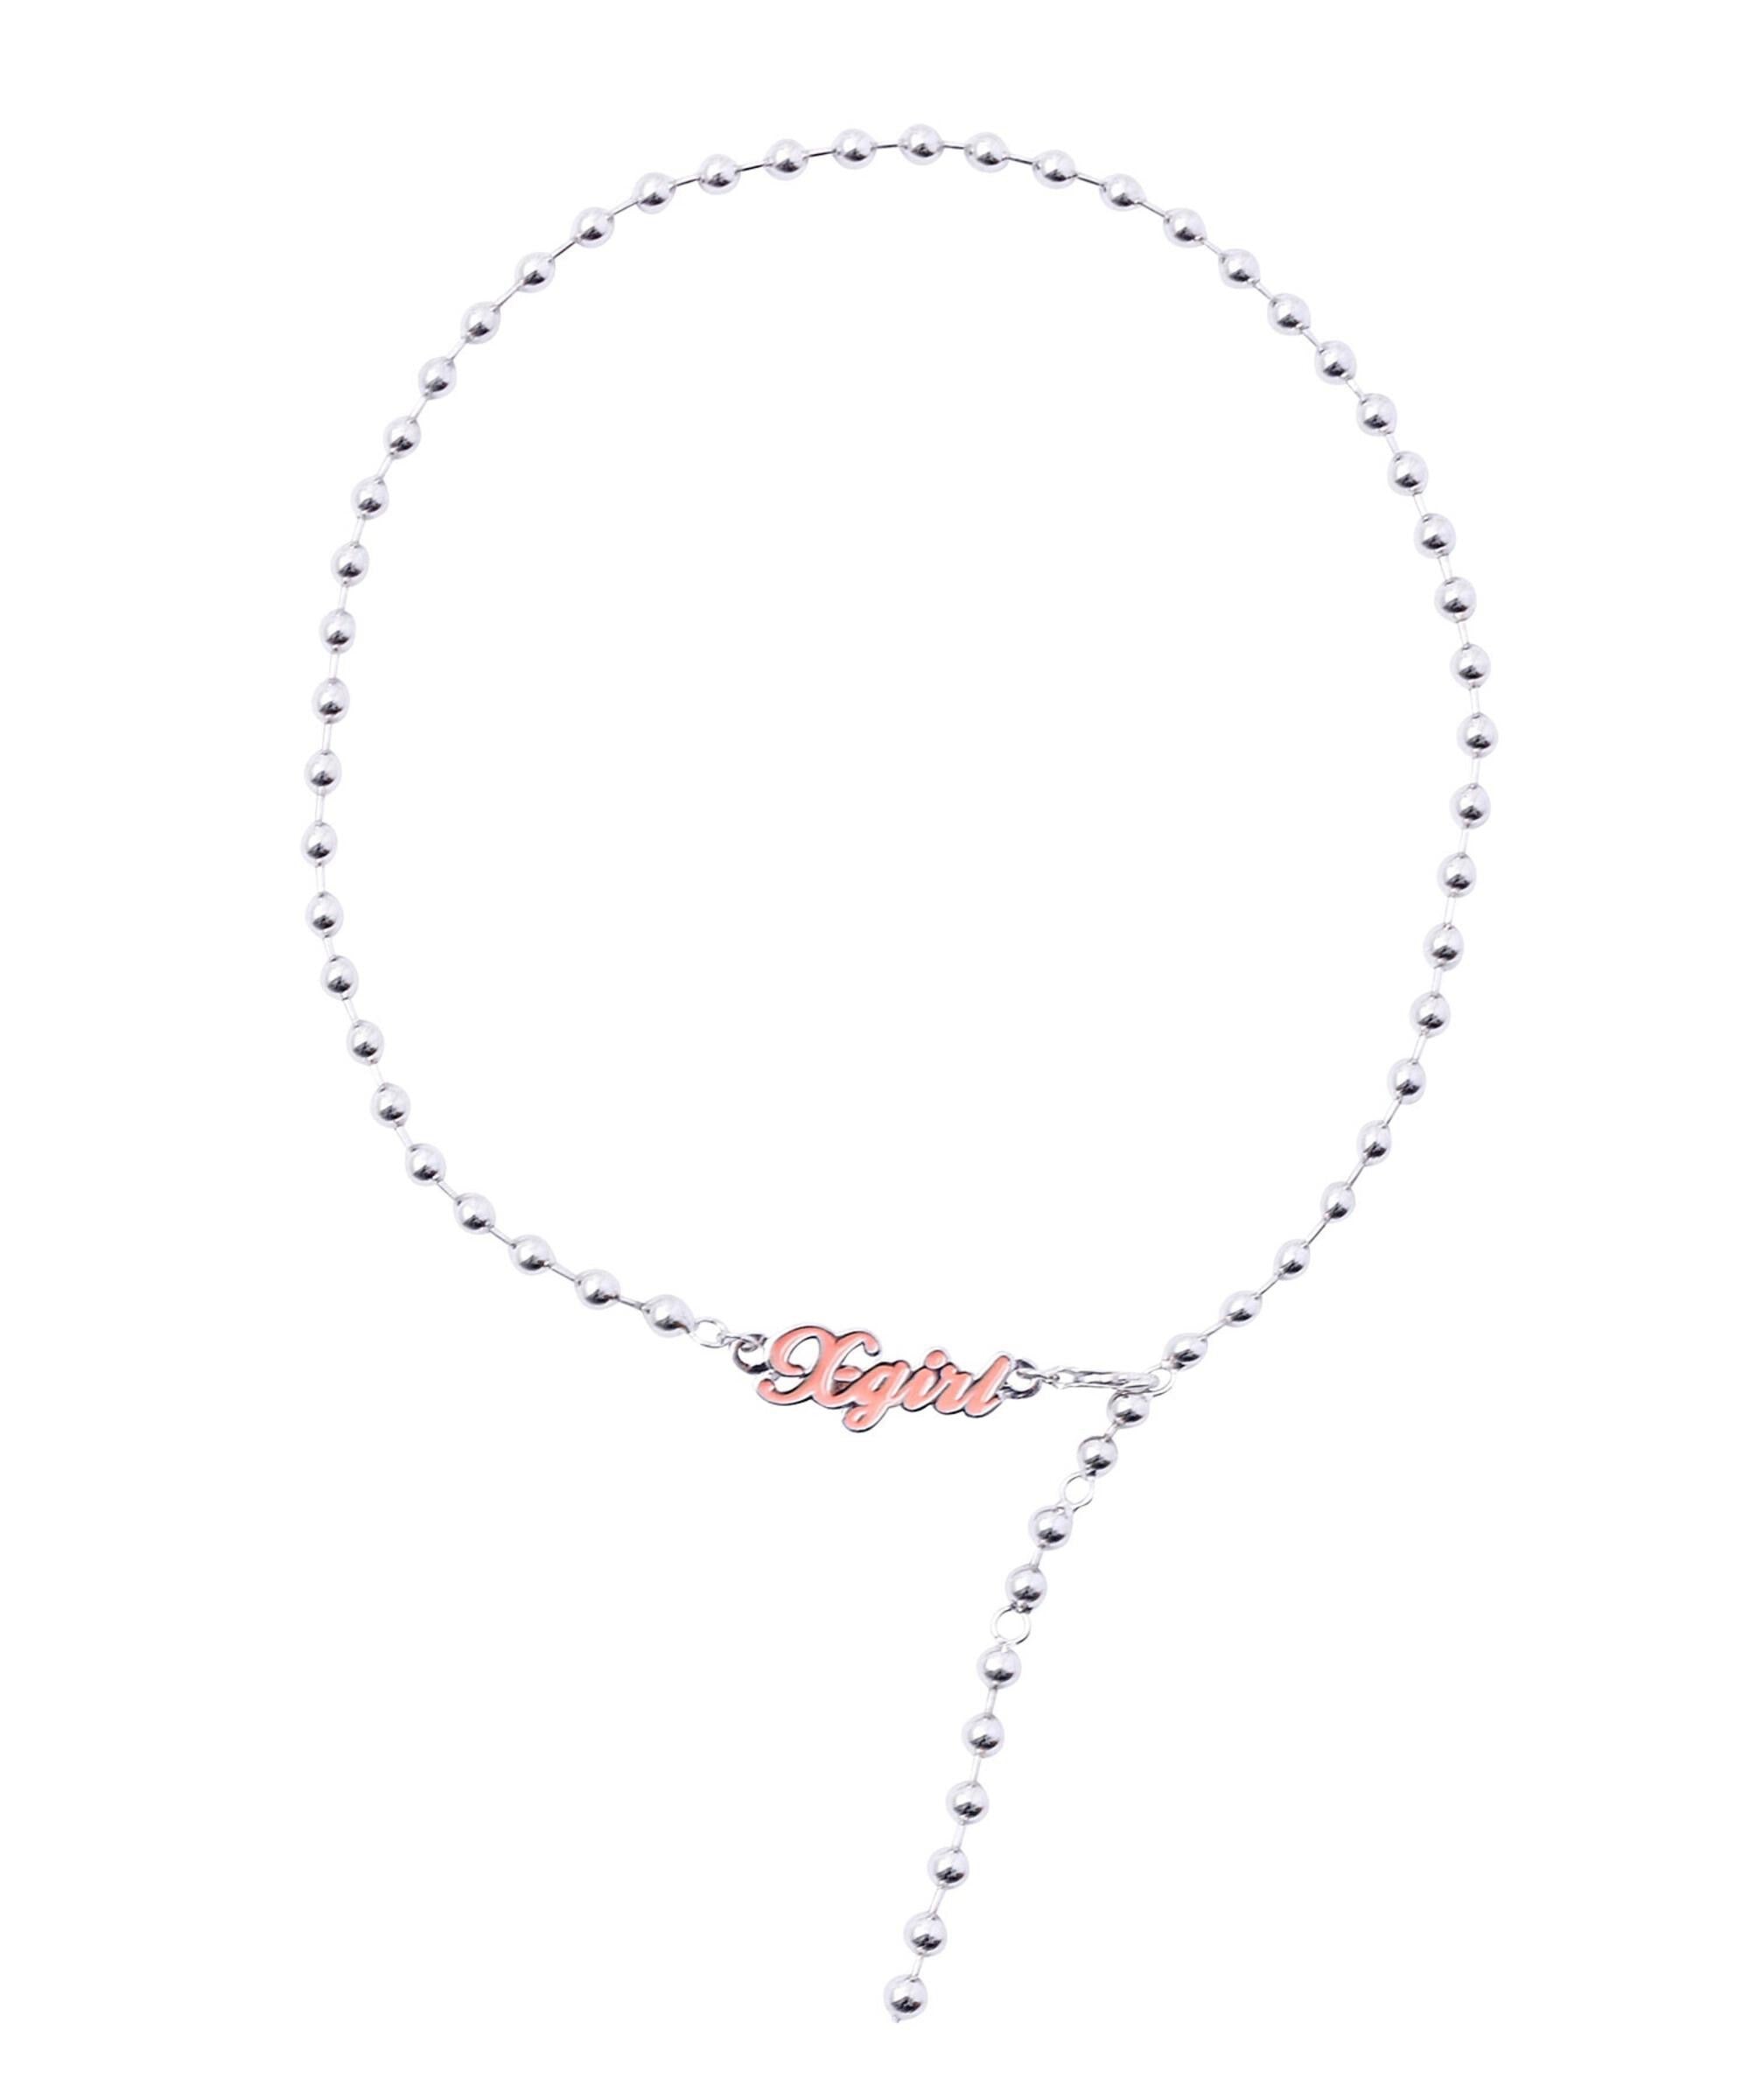 XGirl Ball Chain Necklace - Silver